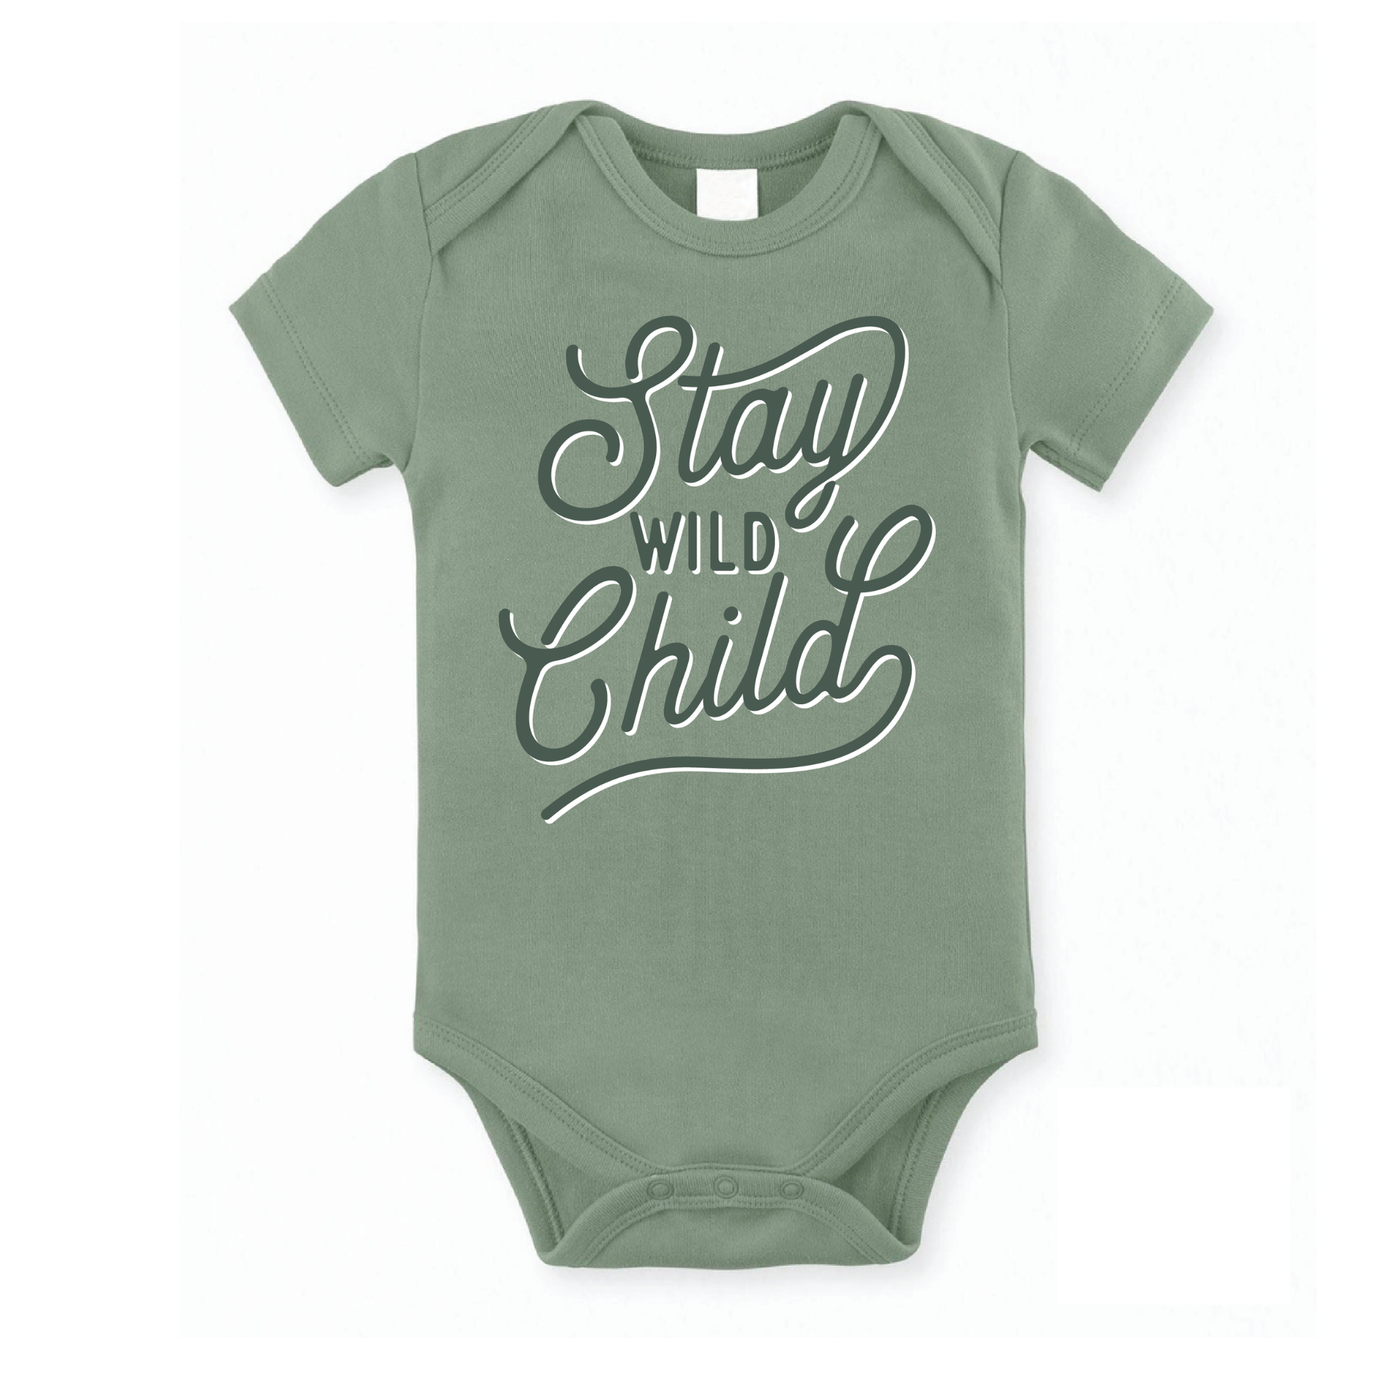 Stay Wild Child Baby Onesie - The Lake and Company